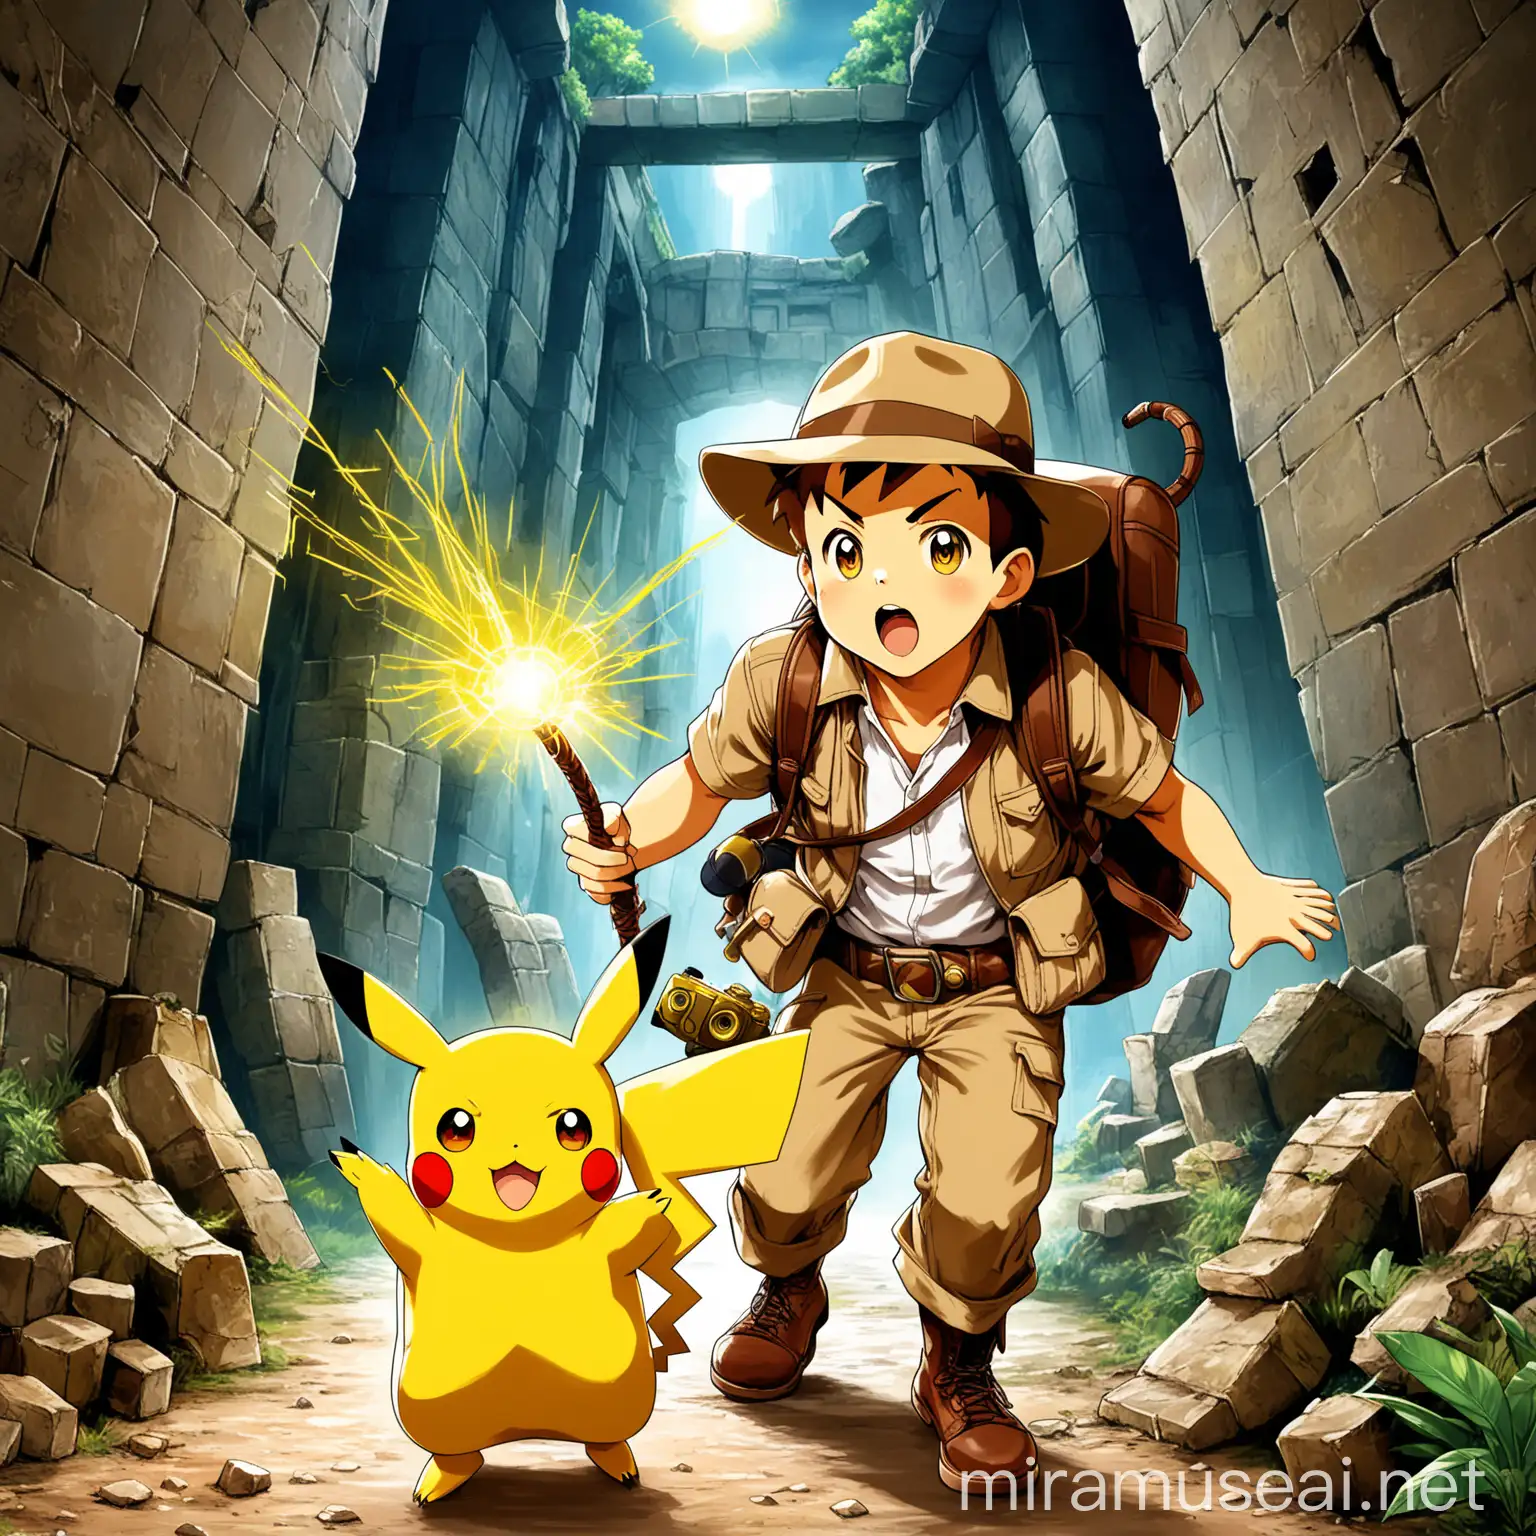 Adventurous Explorer with Pikachu Ready for Ancient Ruins and Treasures